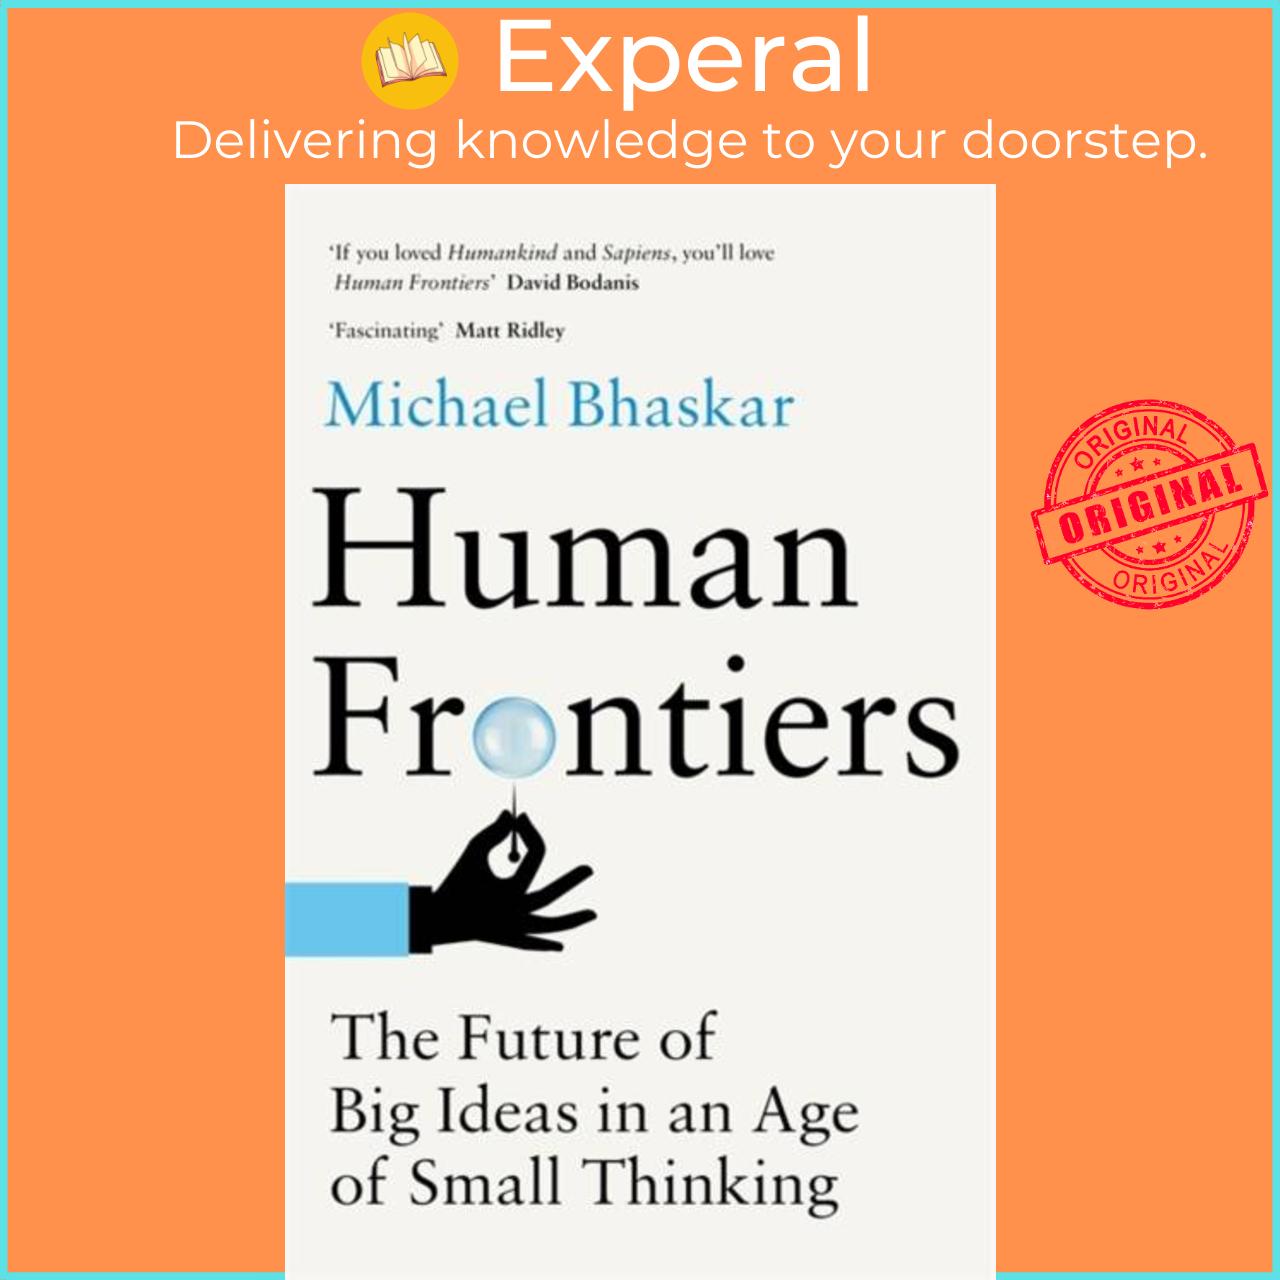 Sách - Human Frontiers - The Future of Big Ideas in an Age of Small Thinking by Michael Bhaskar (UK edition, hardcover)